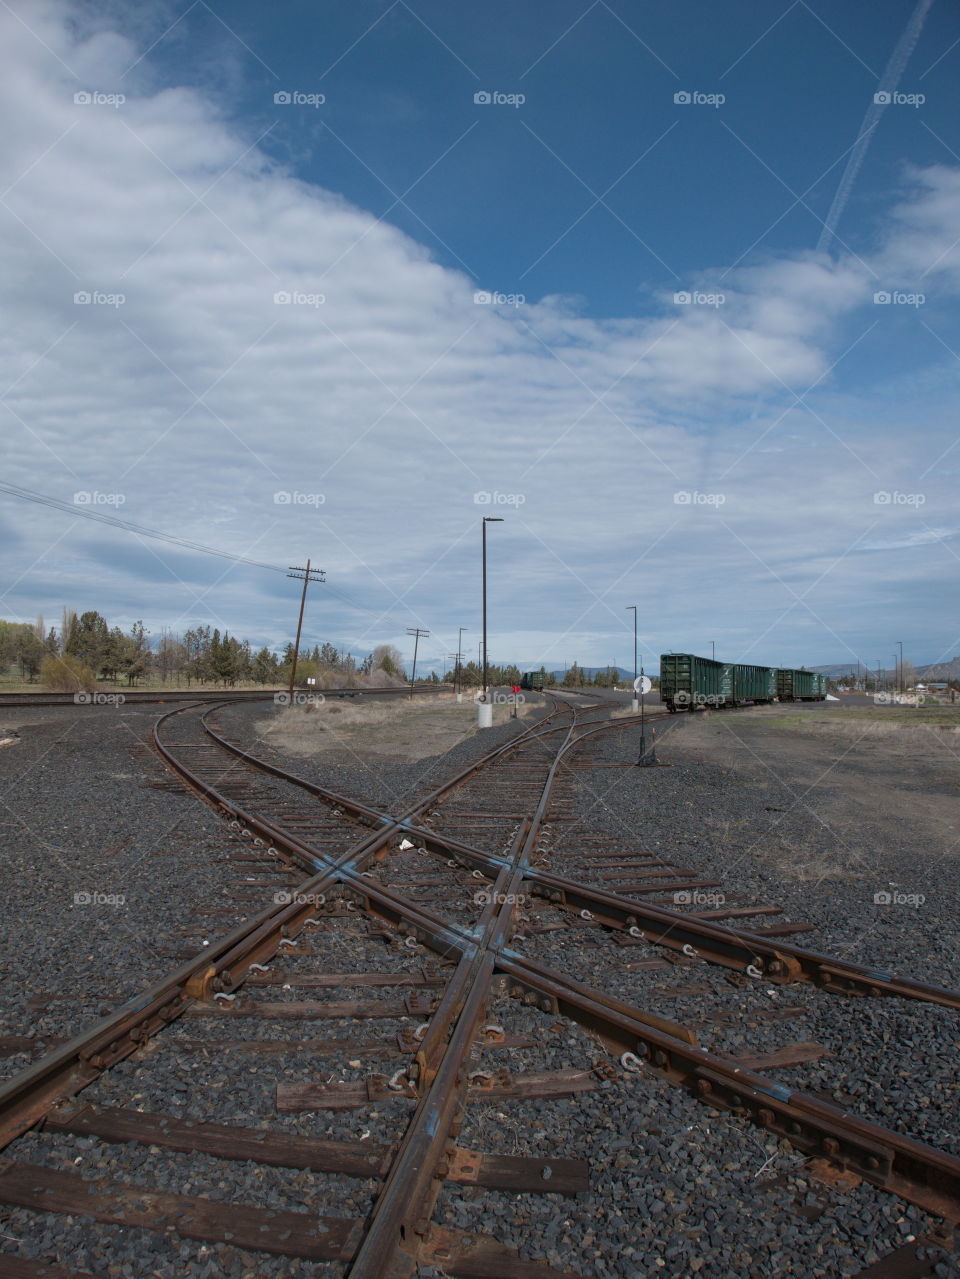 A few abandoned train cars on tracks that criss-cross each other on a sunny spring day in Central Oregon. 